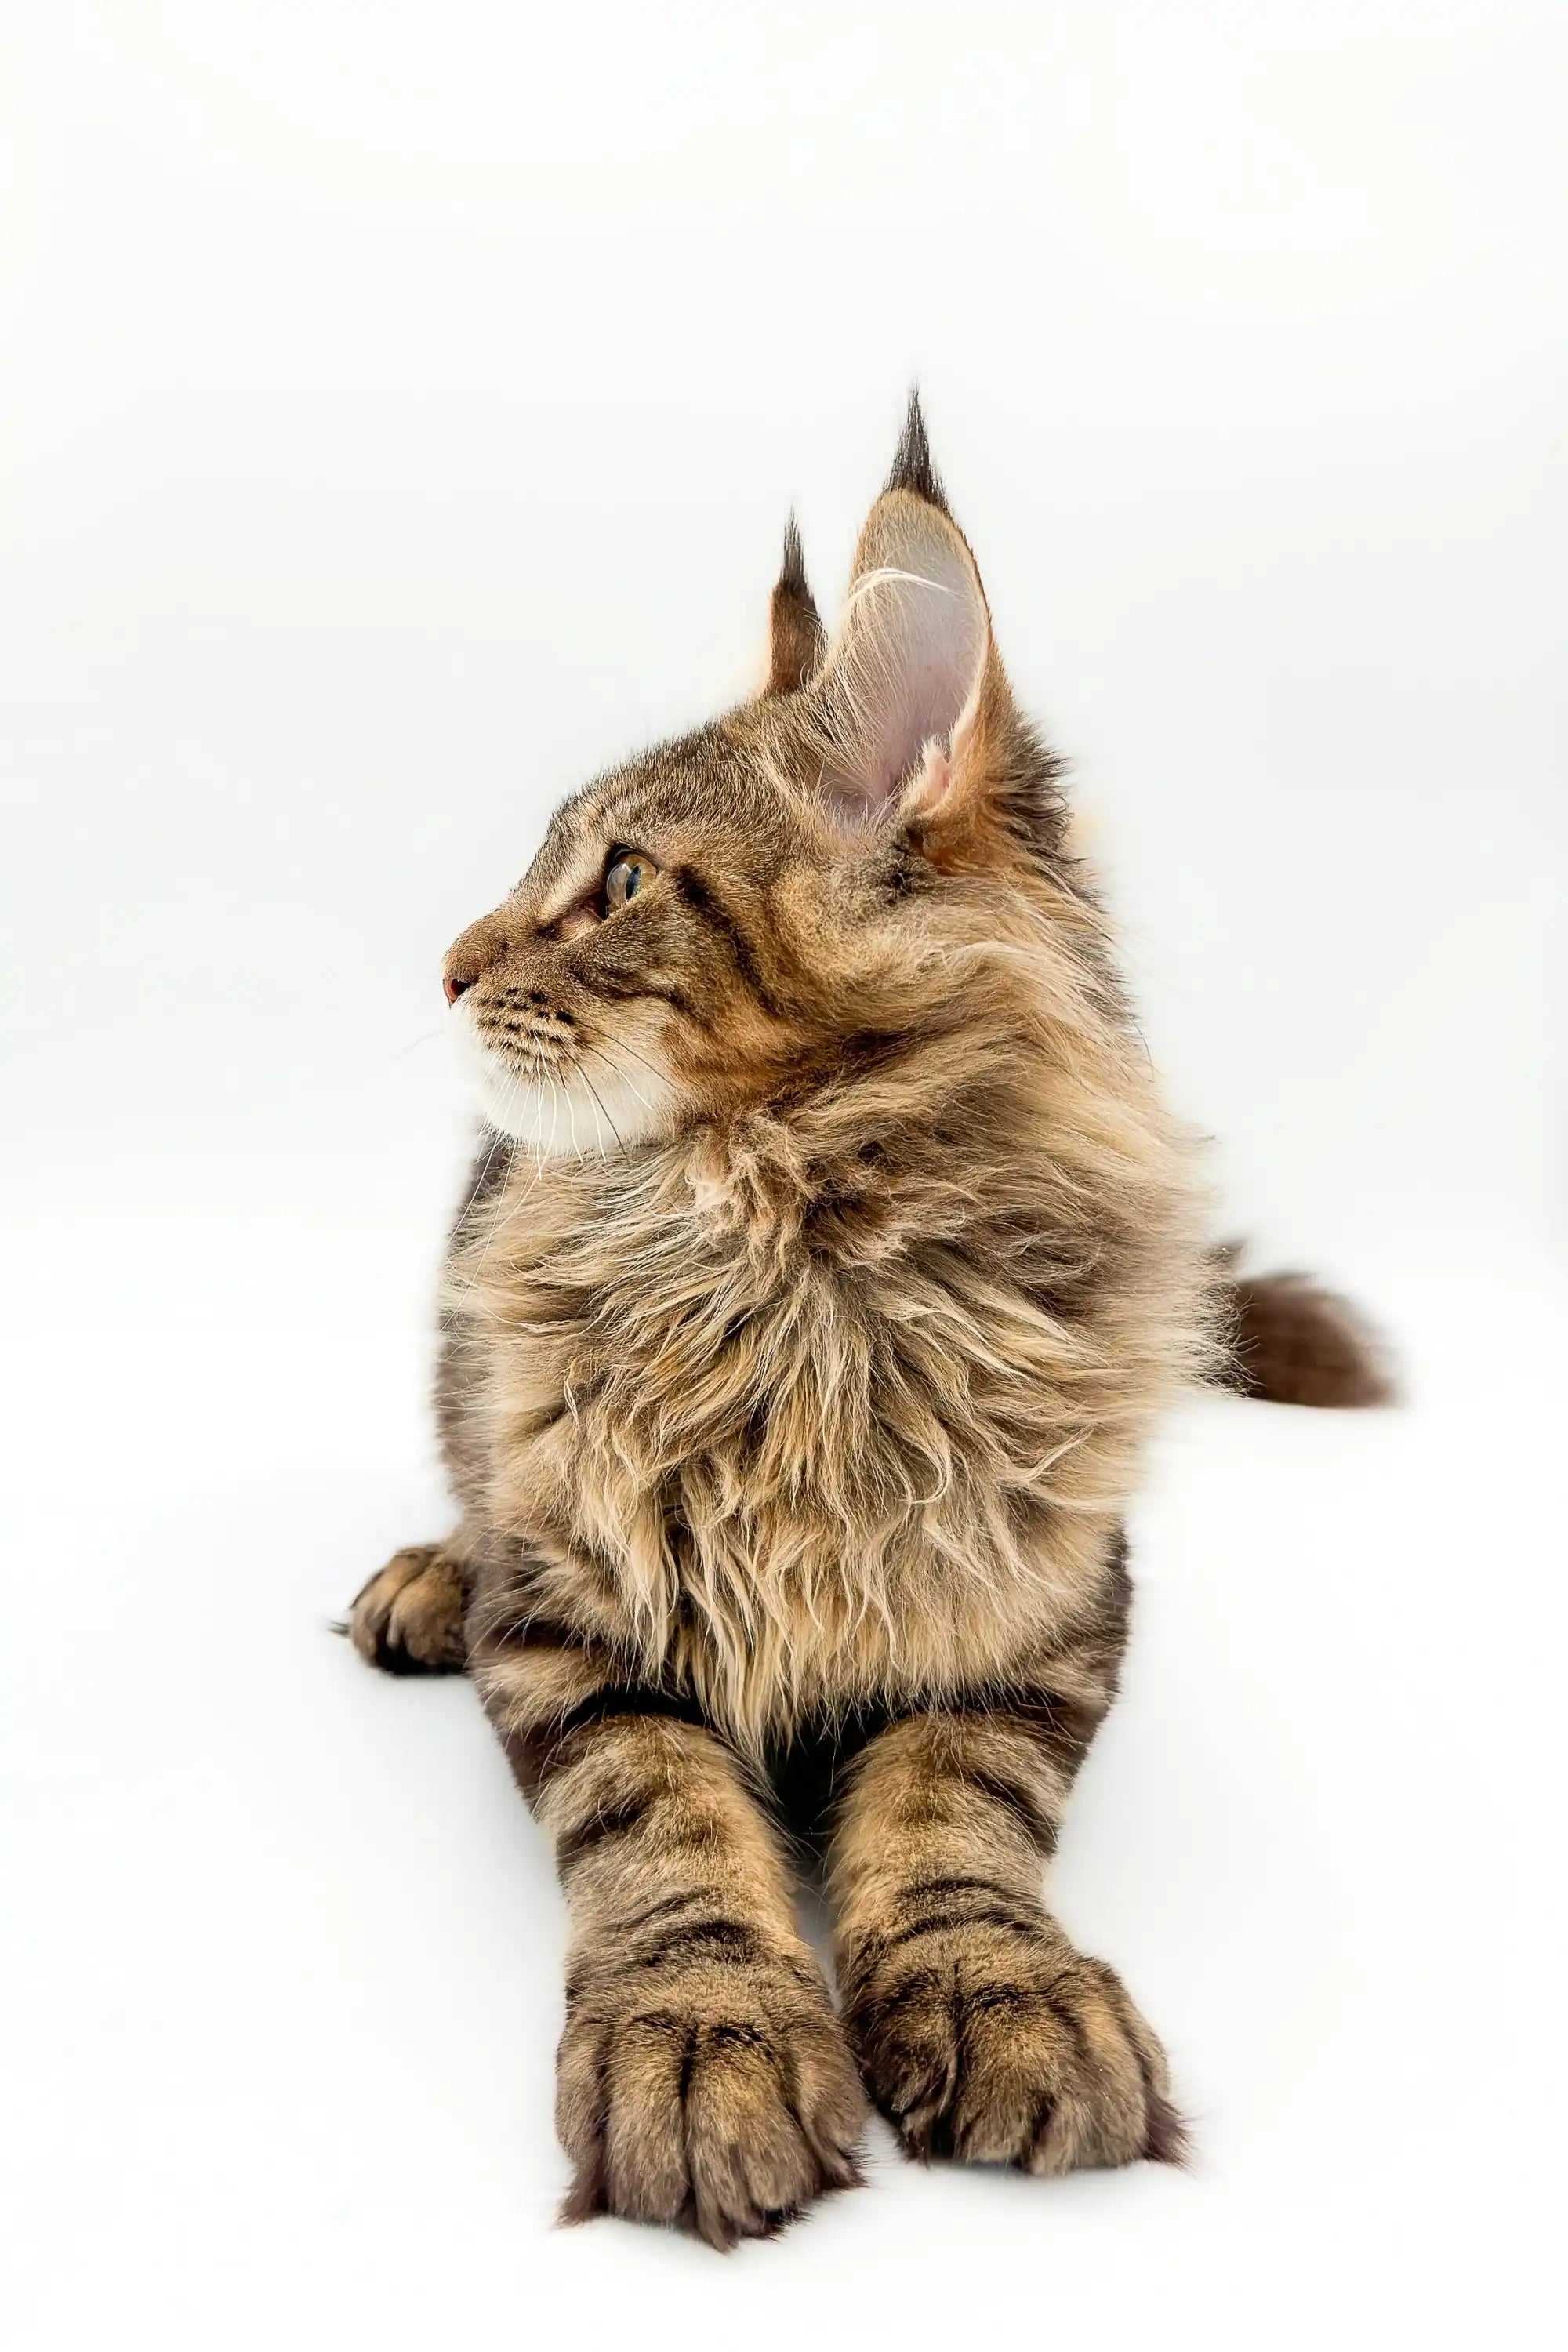 Maine Coon Kittens for Sale Boots | Kitten